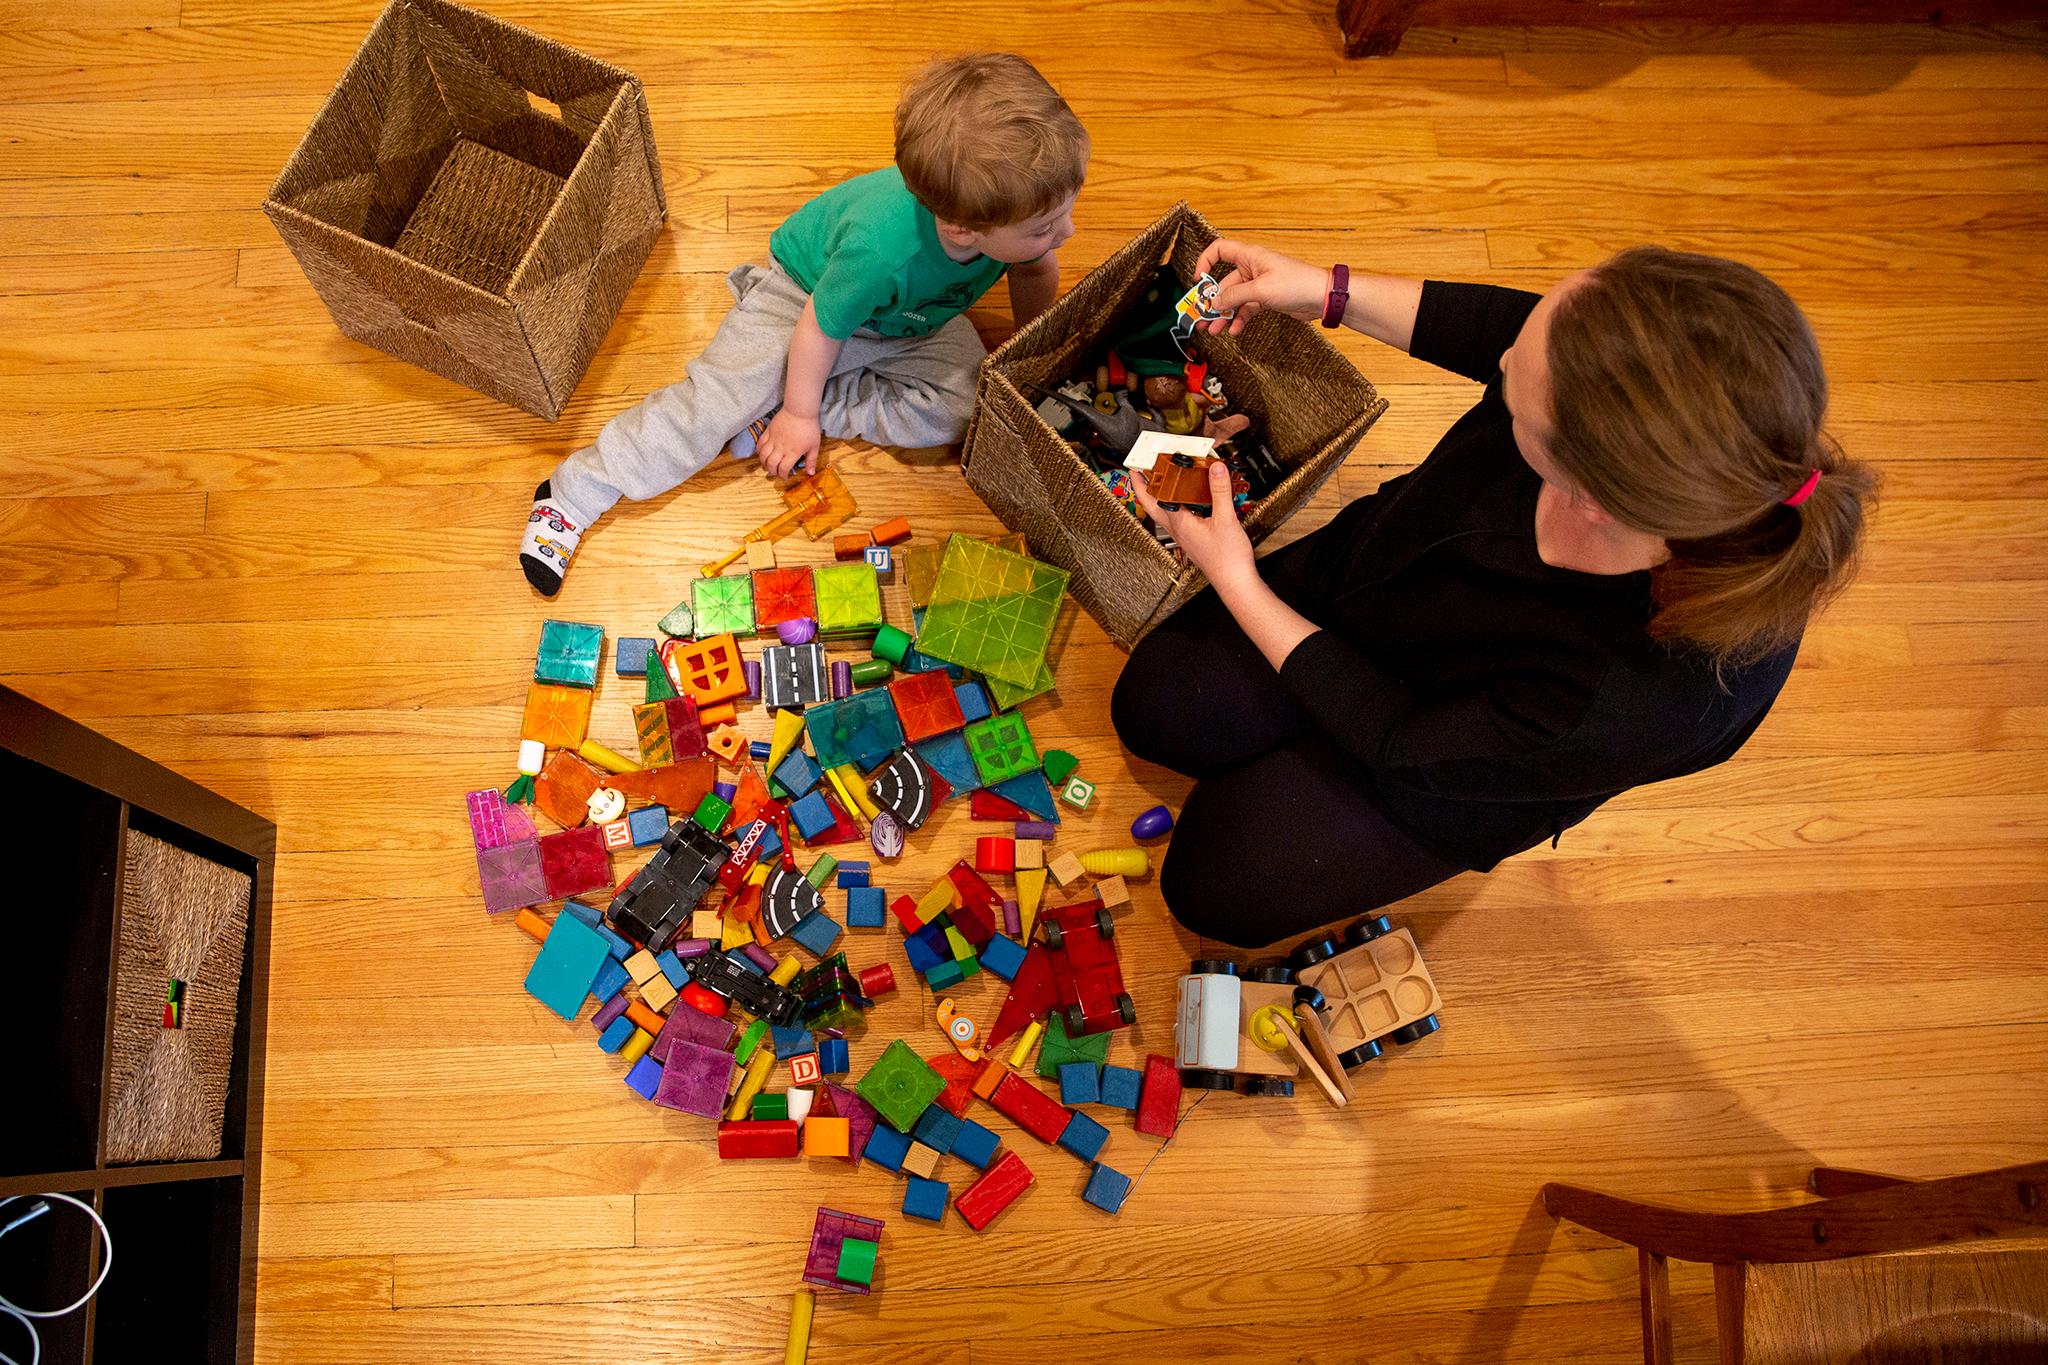 Beatrice Scheuermann and her son, Hans, play on the floor in their Congress Park home. March 22, 2022.